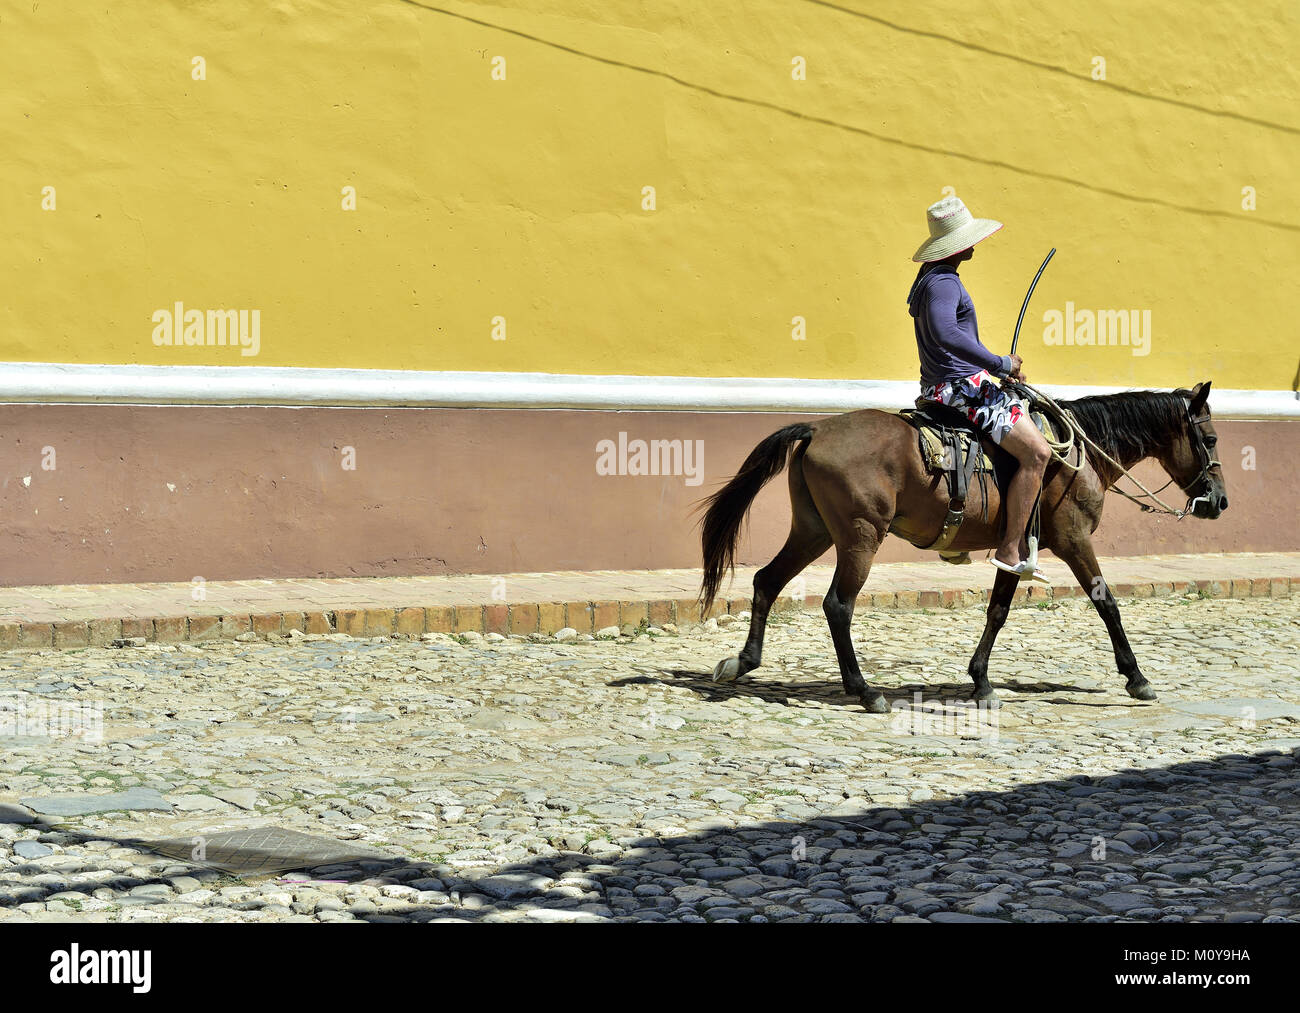 Cuban local man on horse on street in UNESCO protected city of Trinidad, Cuba. Stock Photo